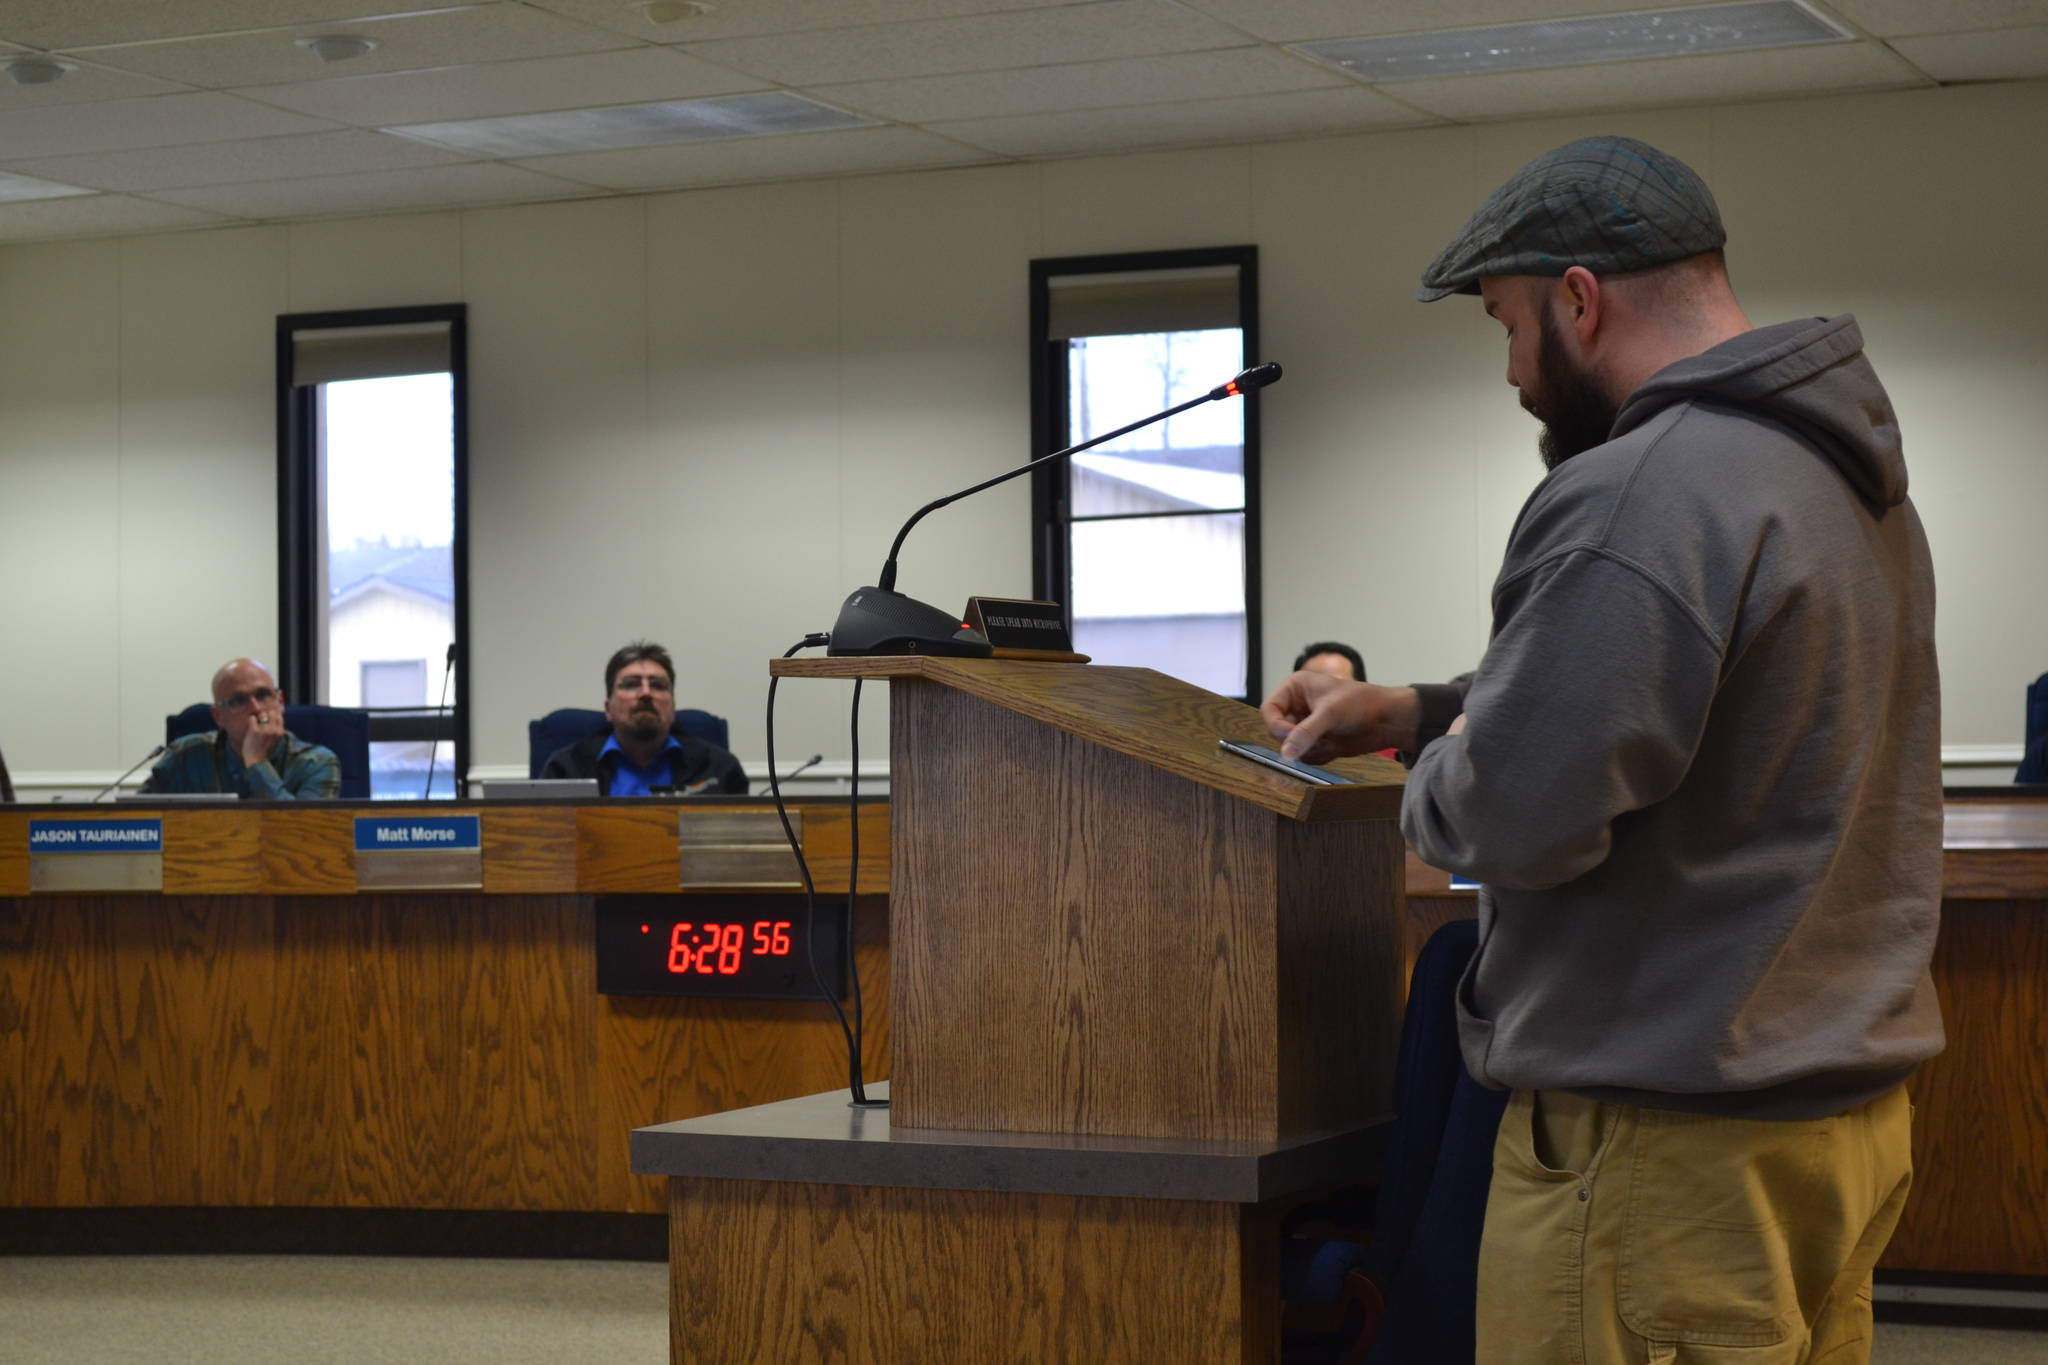 Dustin Poindexter, of Anchor Point, speaks to the Kenai Peninsula Borough School District Board of Education in support of his children’s school, Chapman School, on Thursday, March 21, 2019, in Soldotna, Alaska. (Photo by Victoria Petersen/Peninsula Clarion)